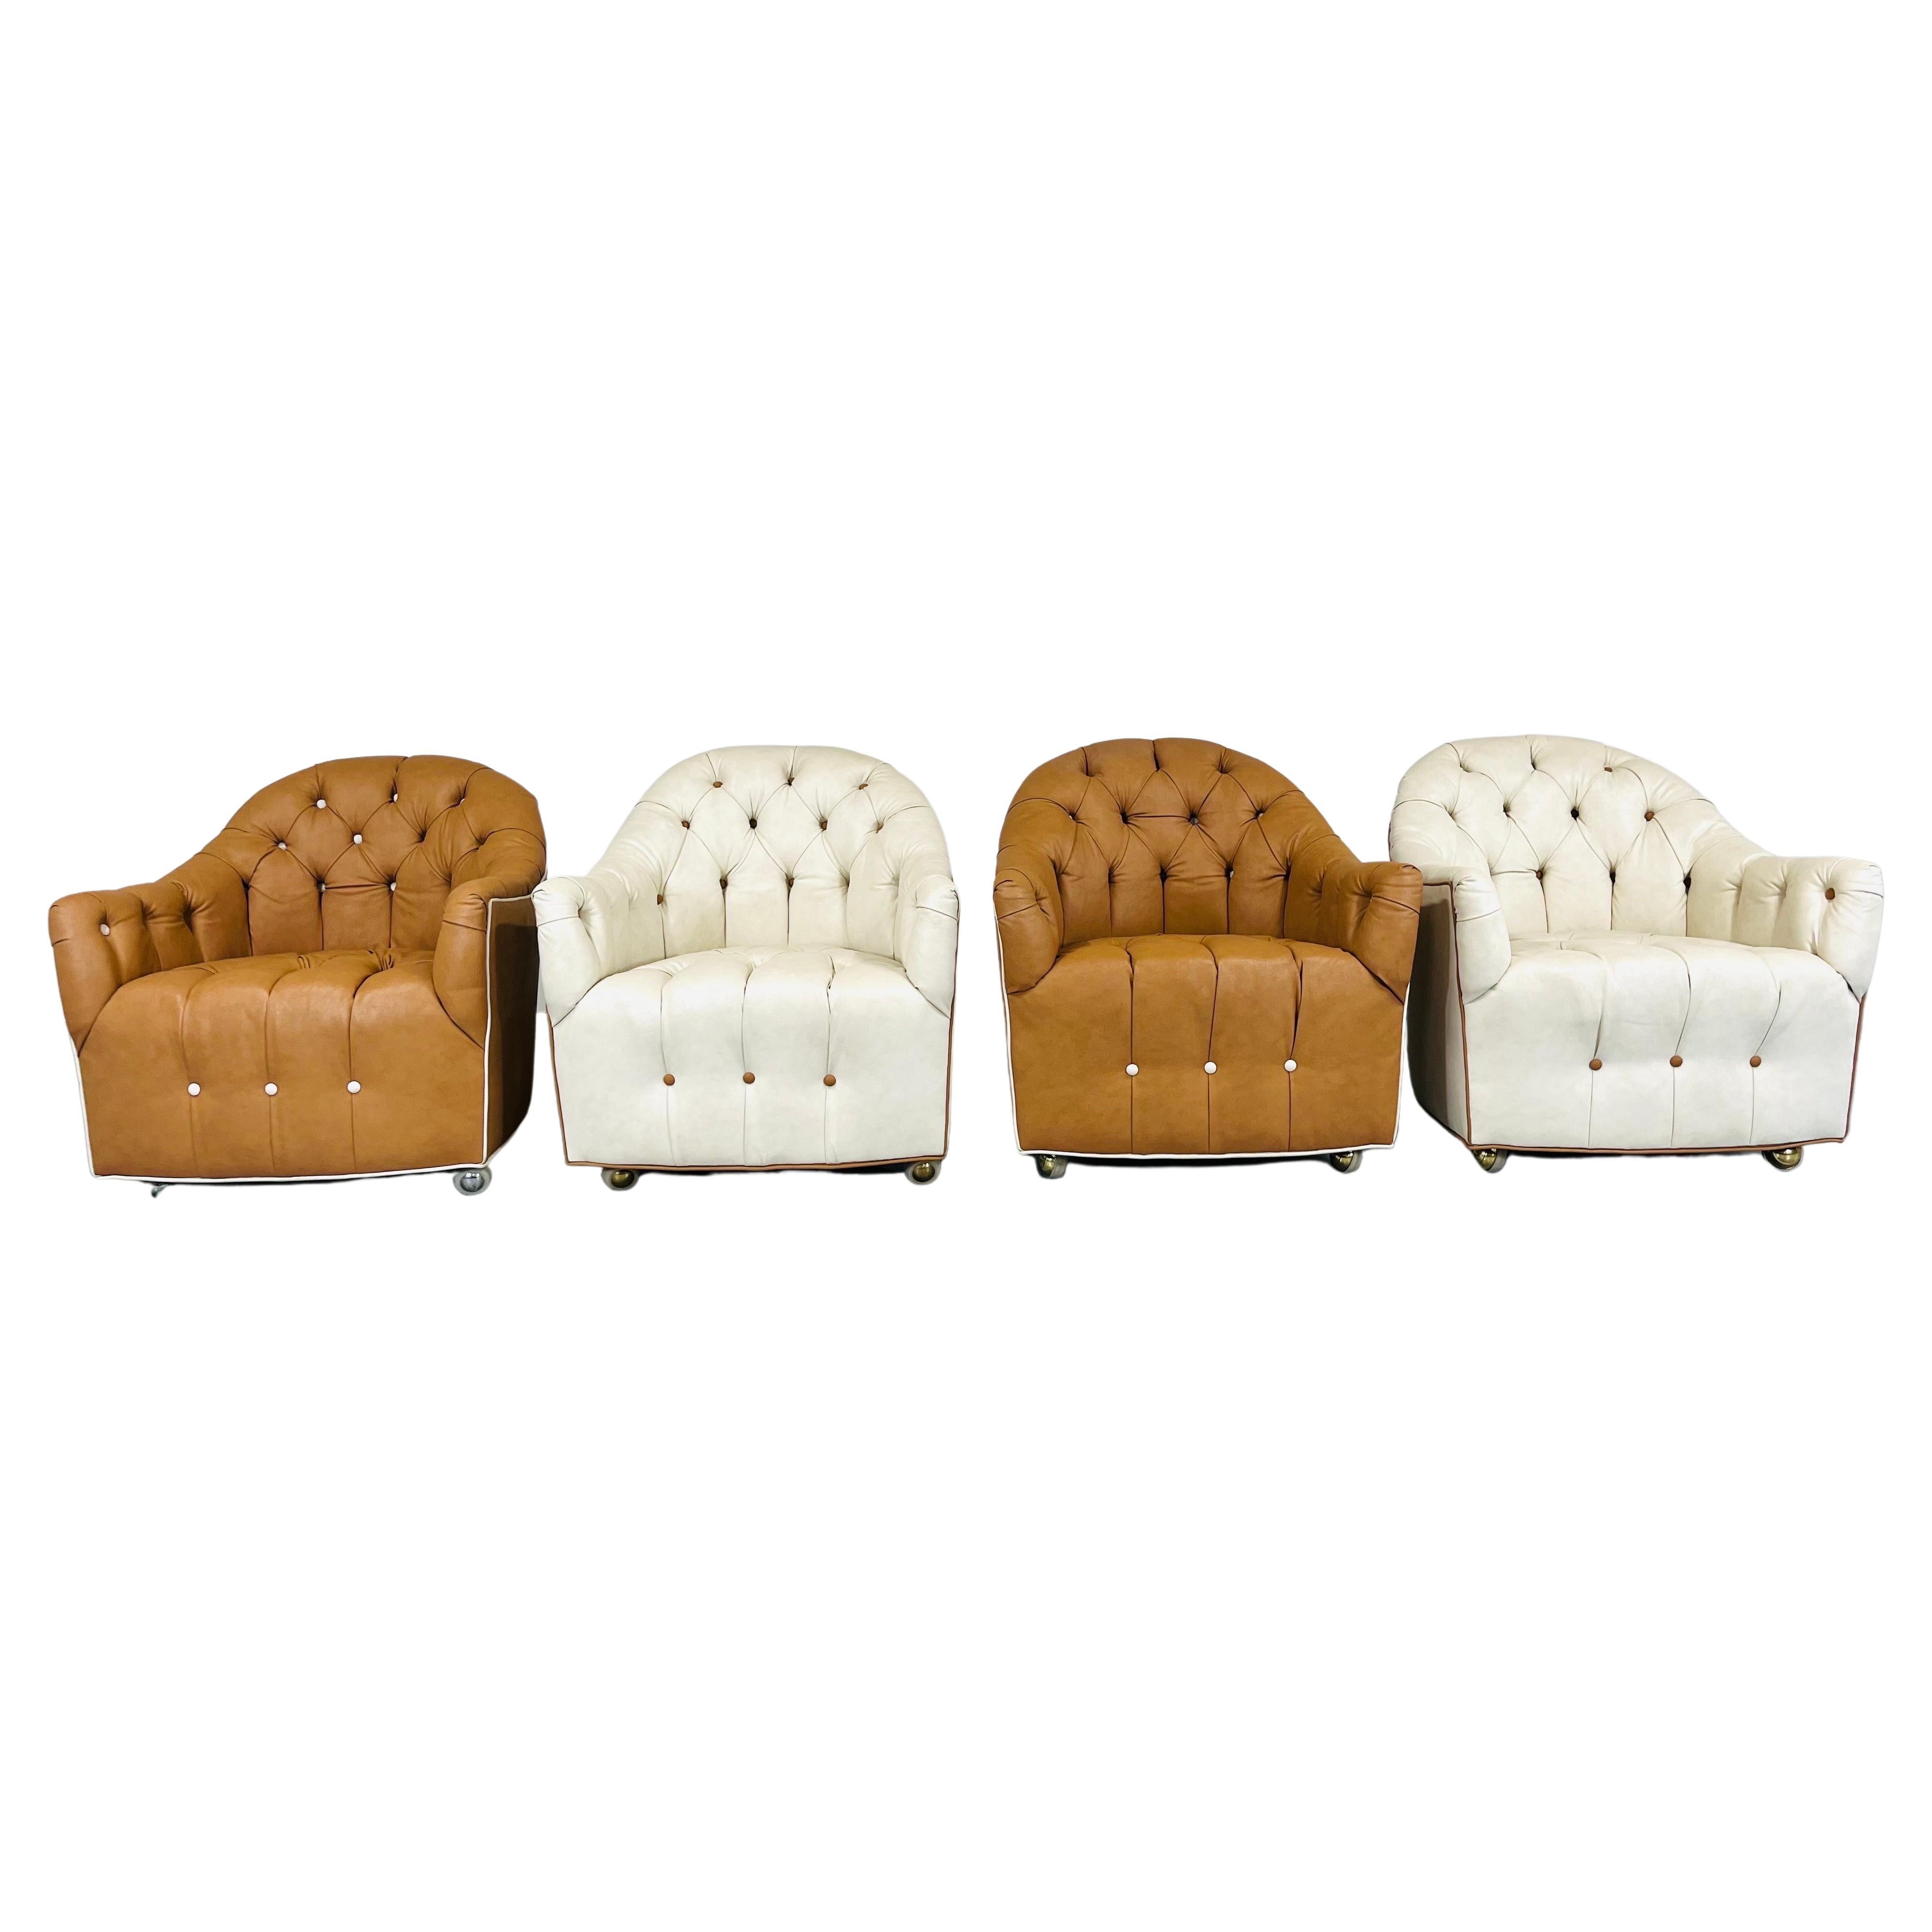 A beautiful 4 piece suite of tufted leather barrel back club chairs attributed to Ward Bennett having color complimentary tufting buttons over smooth rolling ball casters. 
 Extremely comfortable having barrel backs that hug your back perfectly.